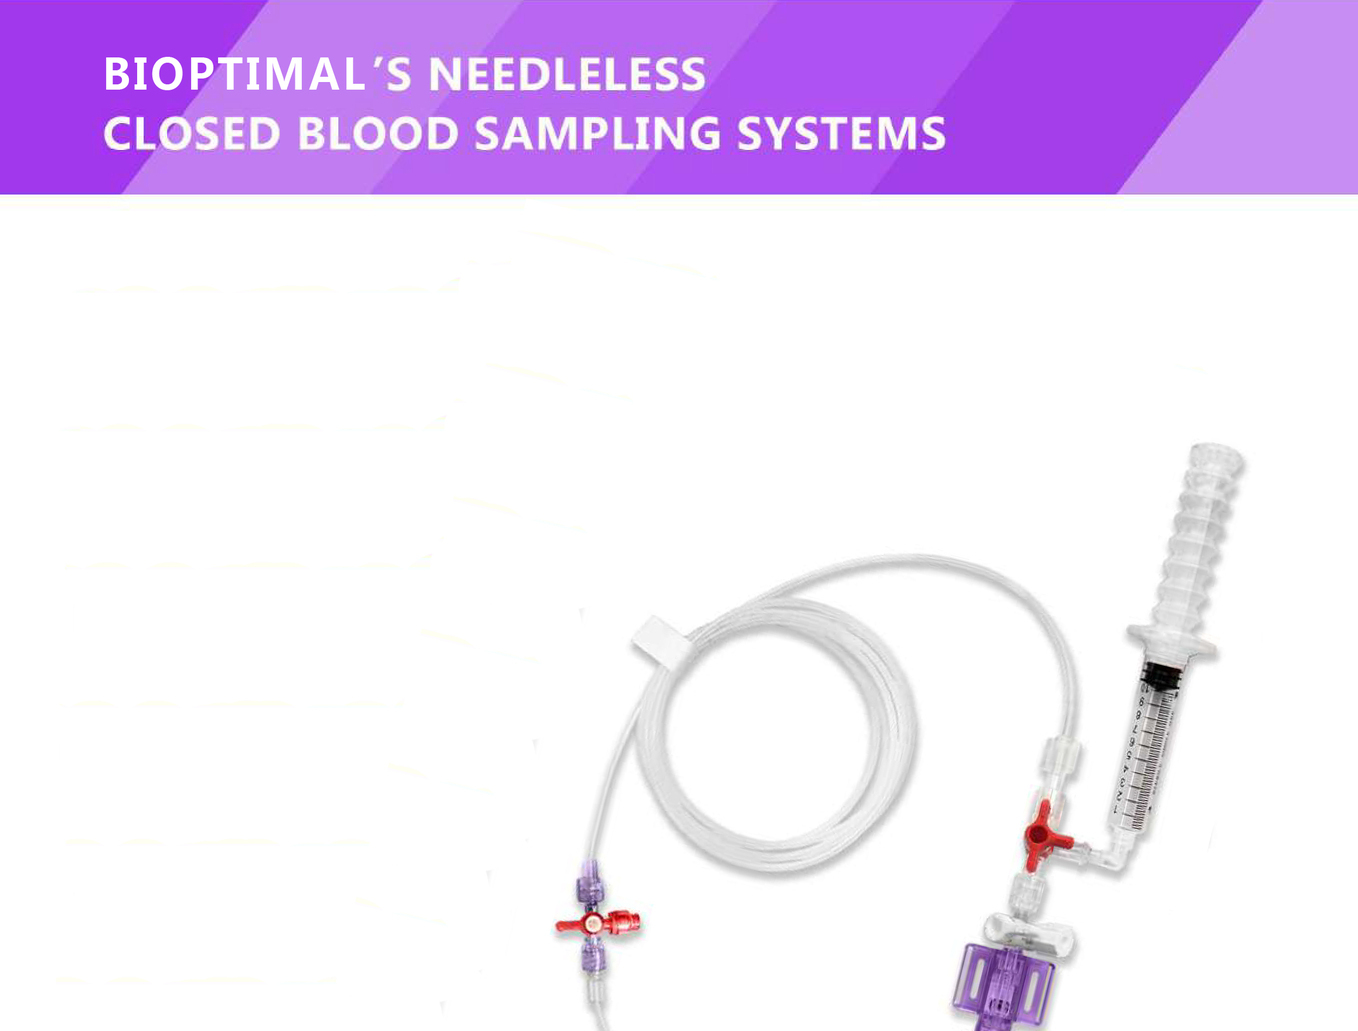 <p><span style="font-weight: bold;">Bioptimal`s Needleless Closed Blood Sampling Systems</span><br></p>